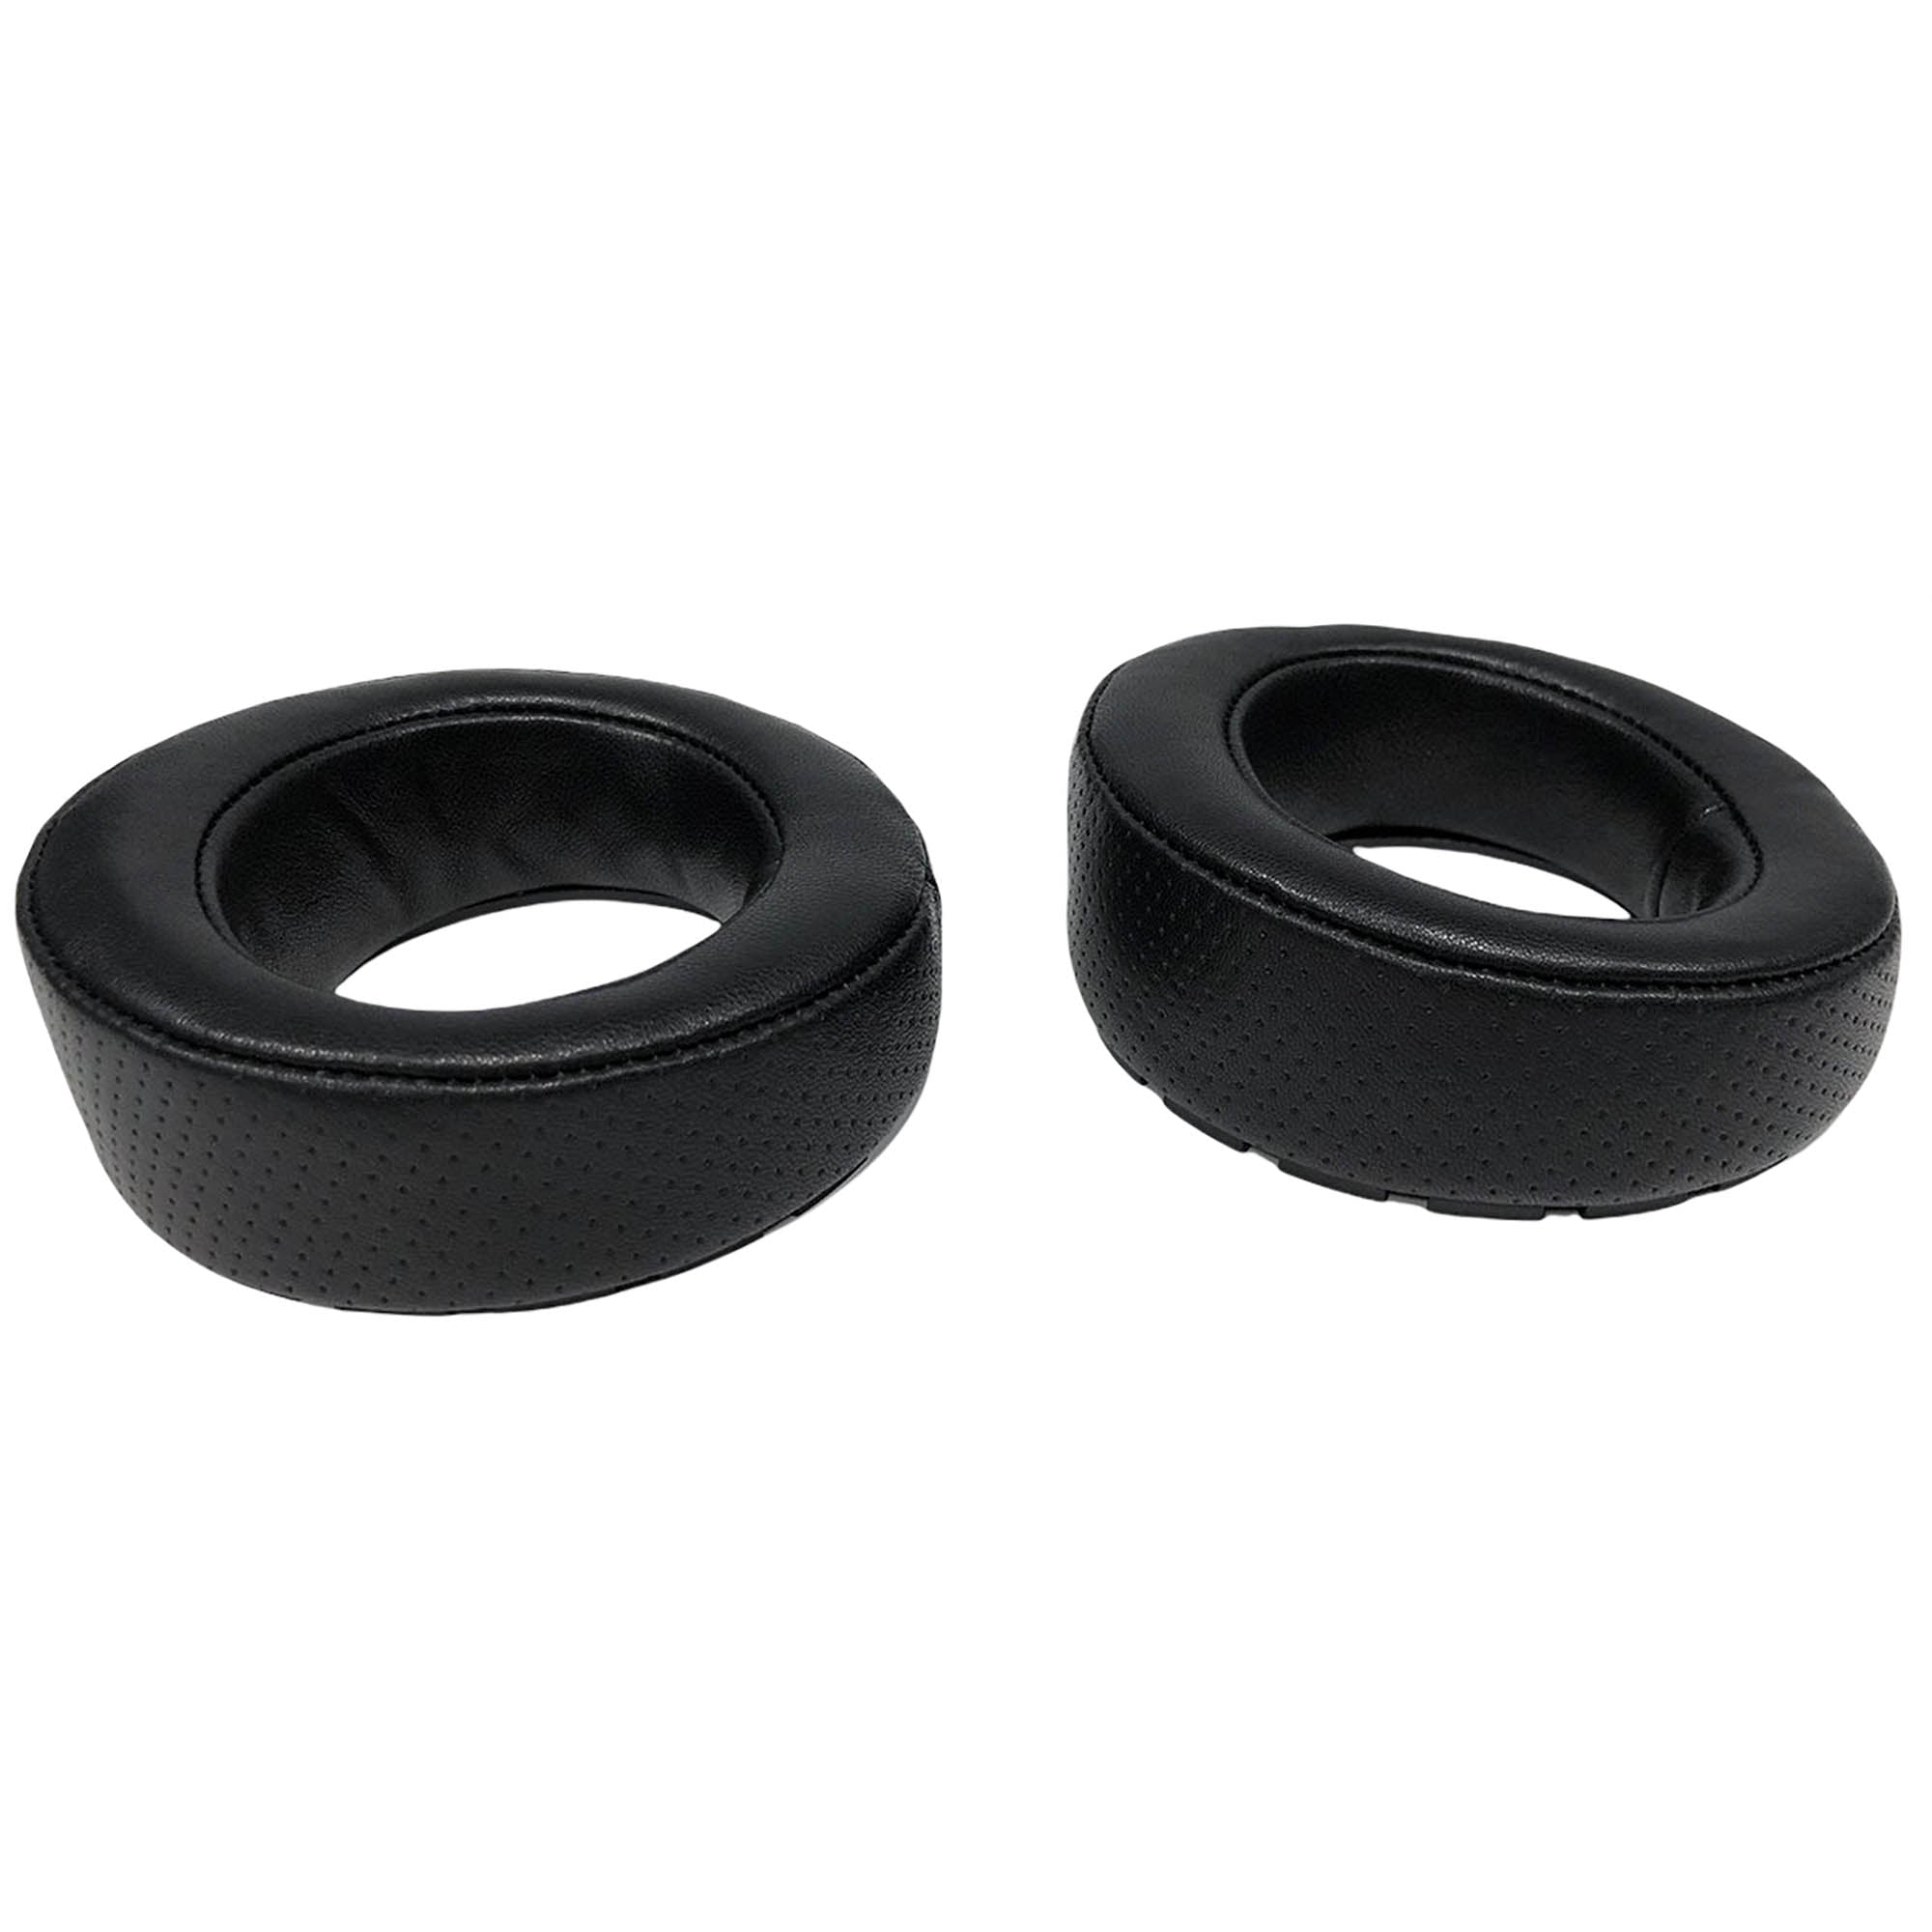 Replacement Ear Pads for Abyss AB1266 - Latest Version